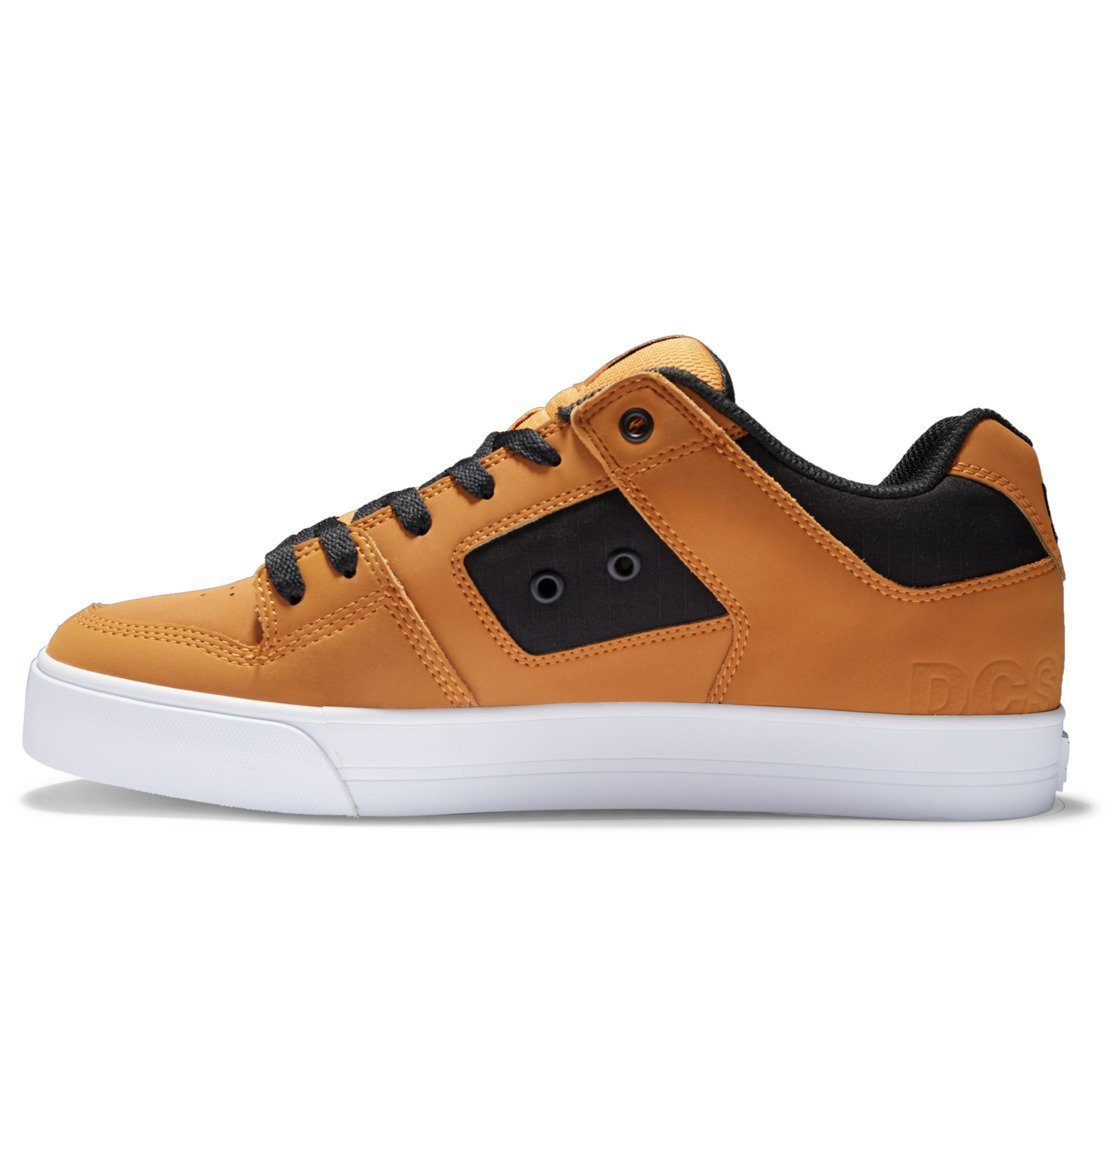 DC Dk Choco/Black/Oyster Sneaker Shoes Pure